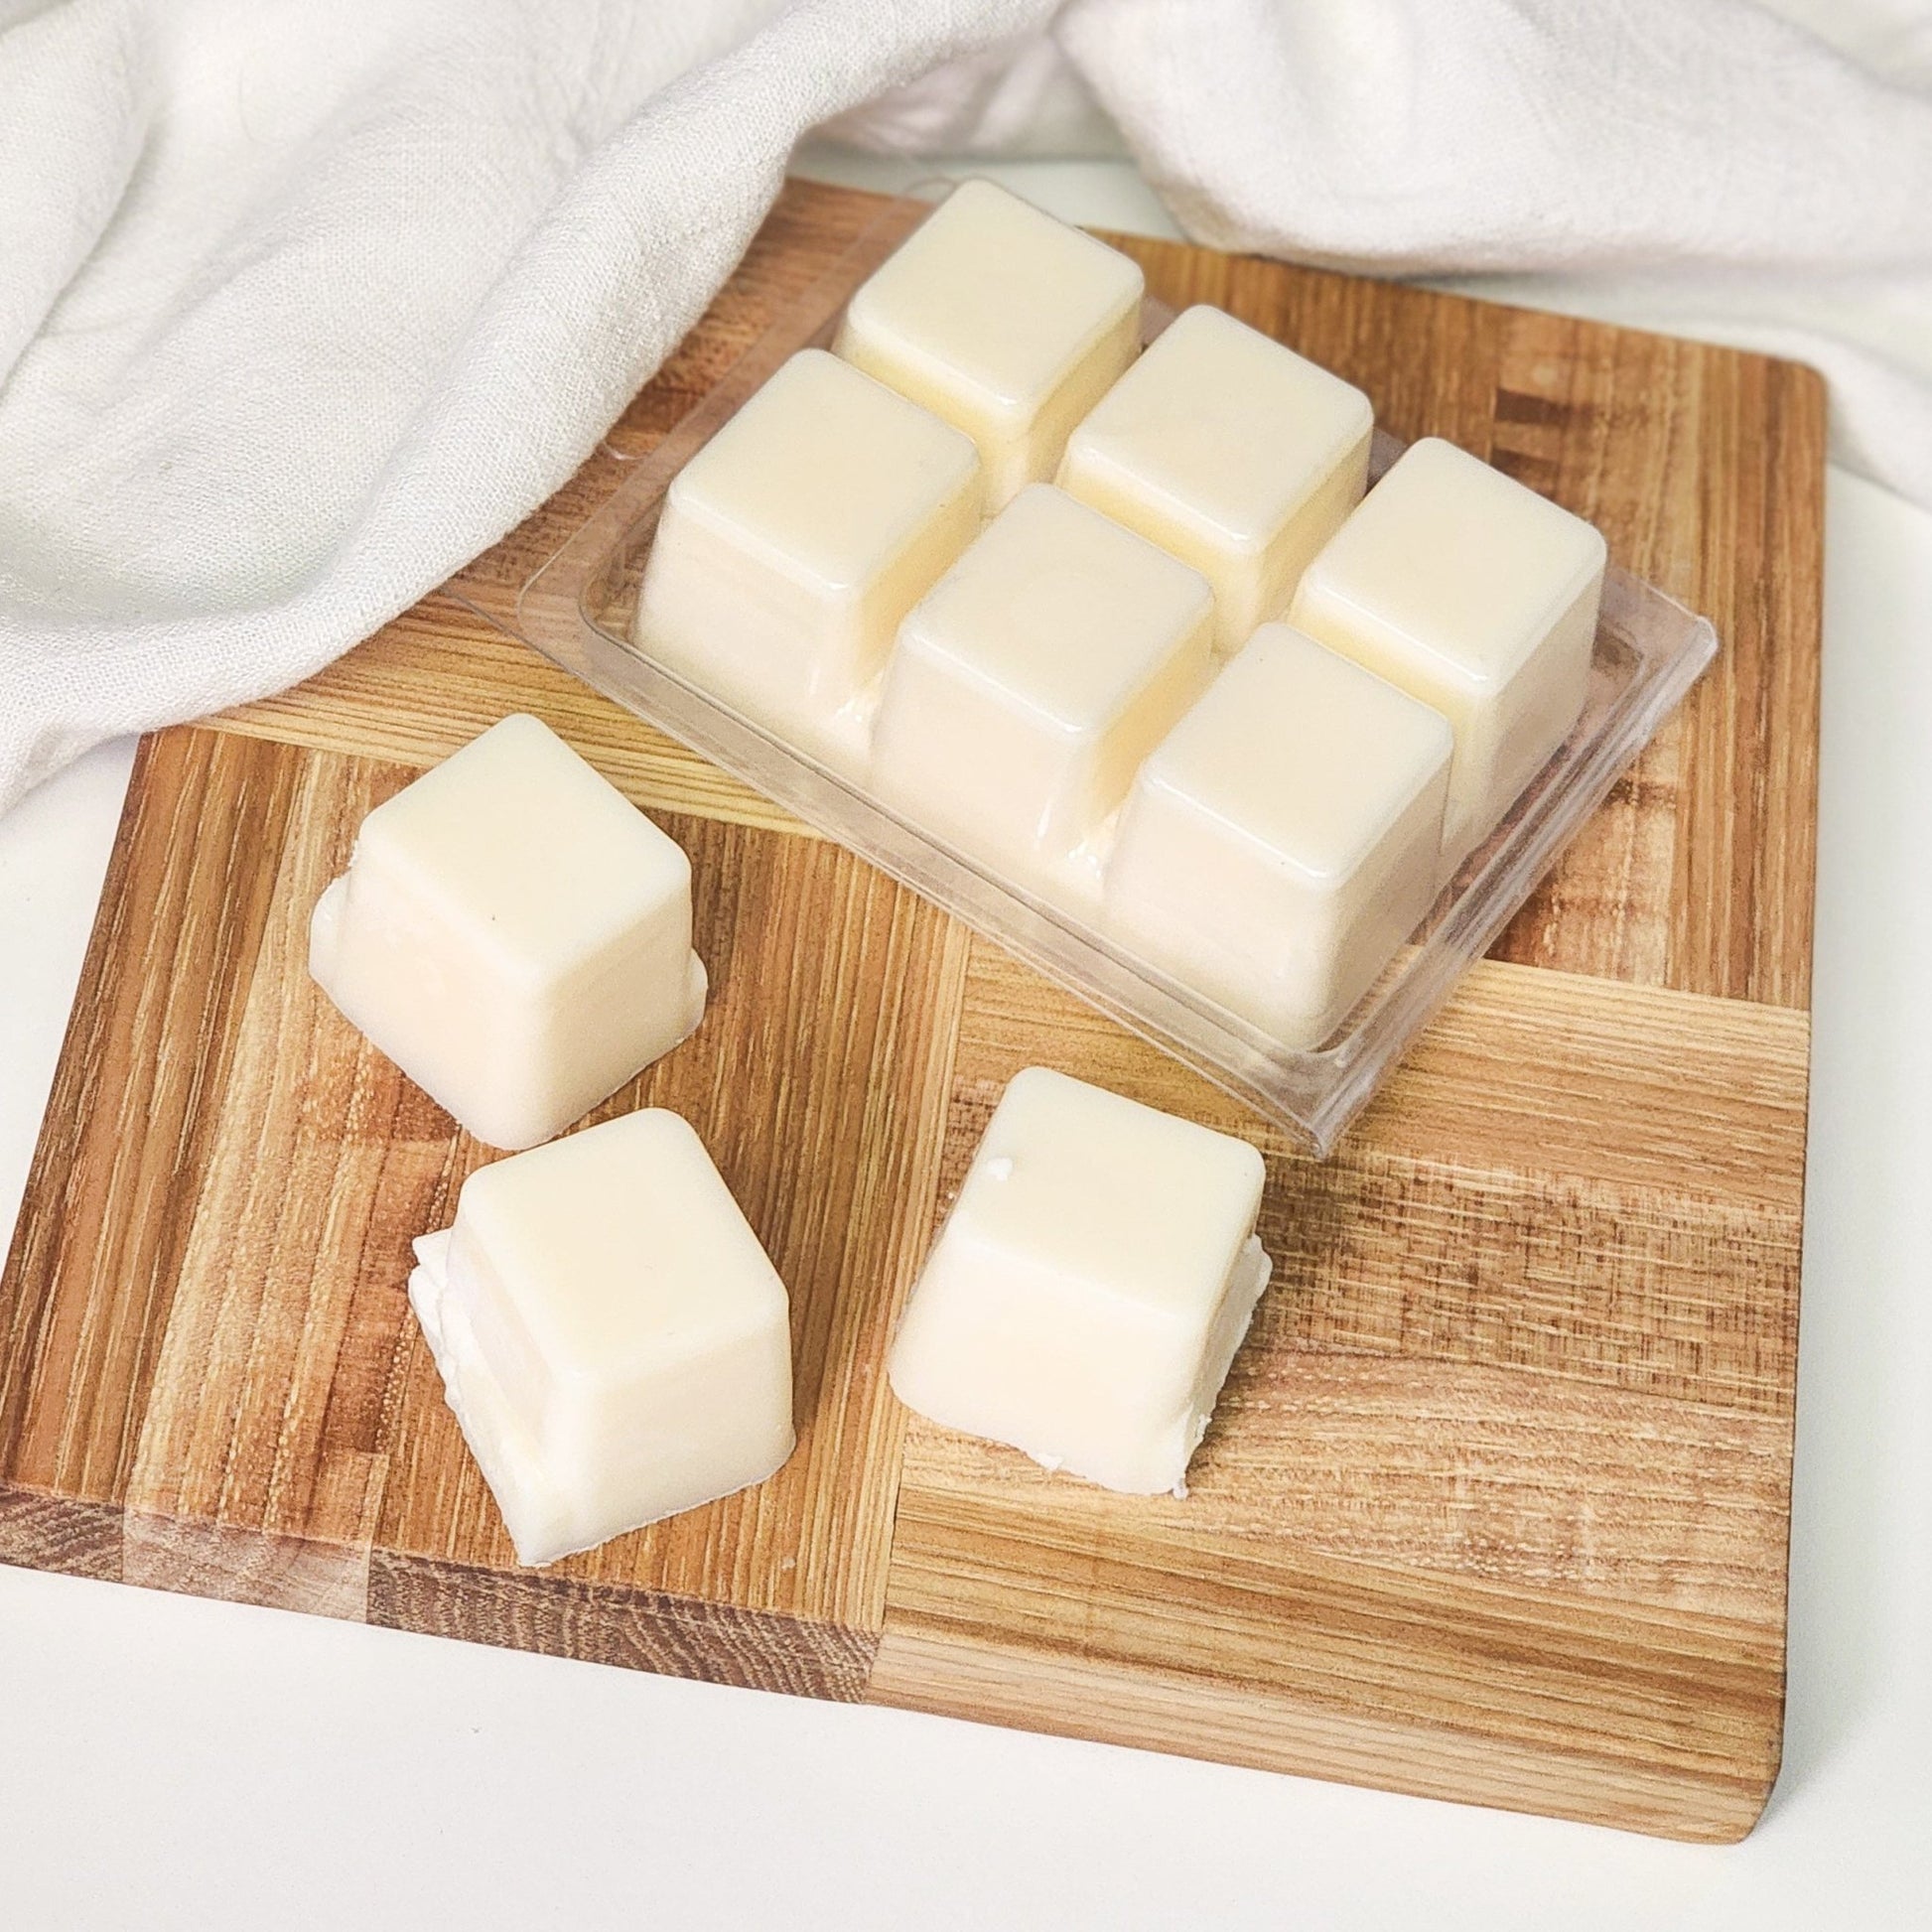 Butterscotch and Bourbon Soy Wax Melts - Abboo Candle Co